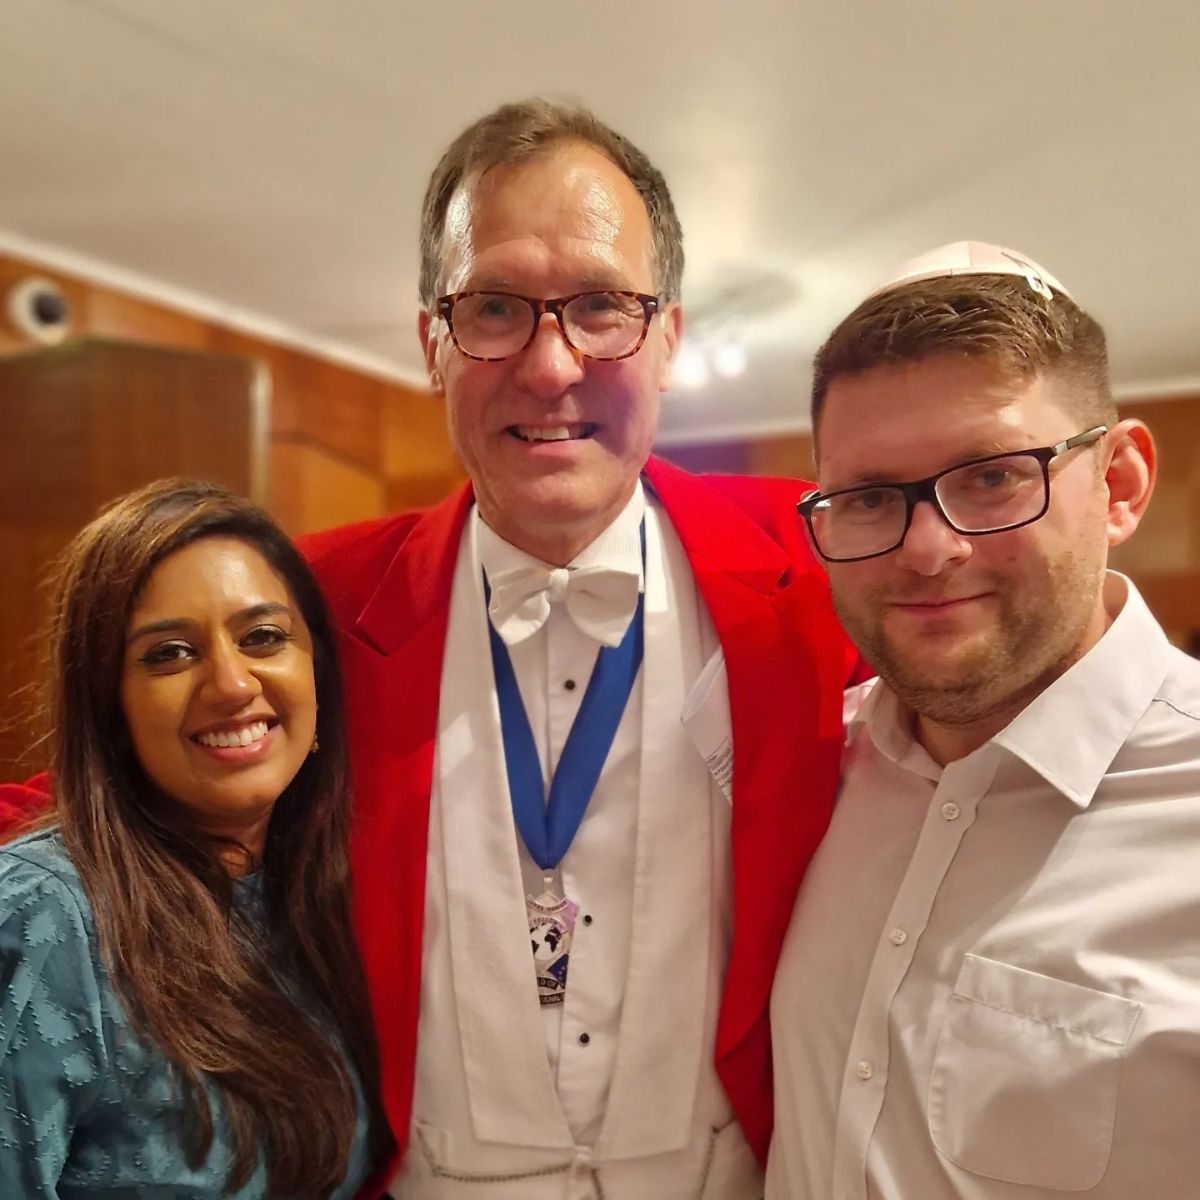 The Man in the Red Coat - Toastmaster James Hasler-Image-56